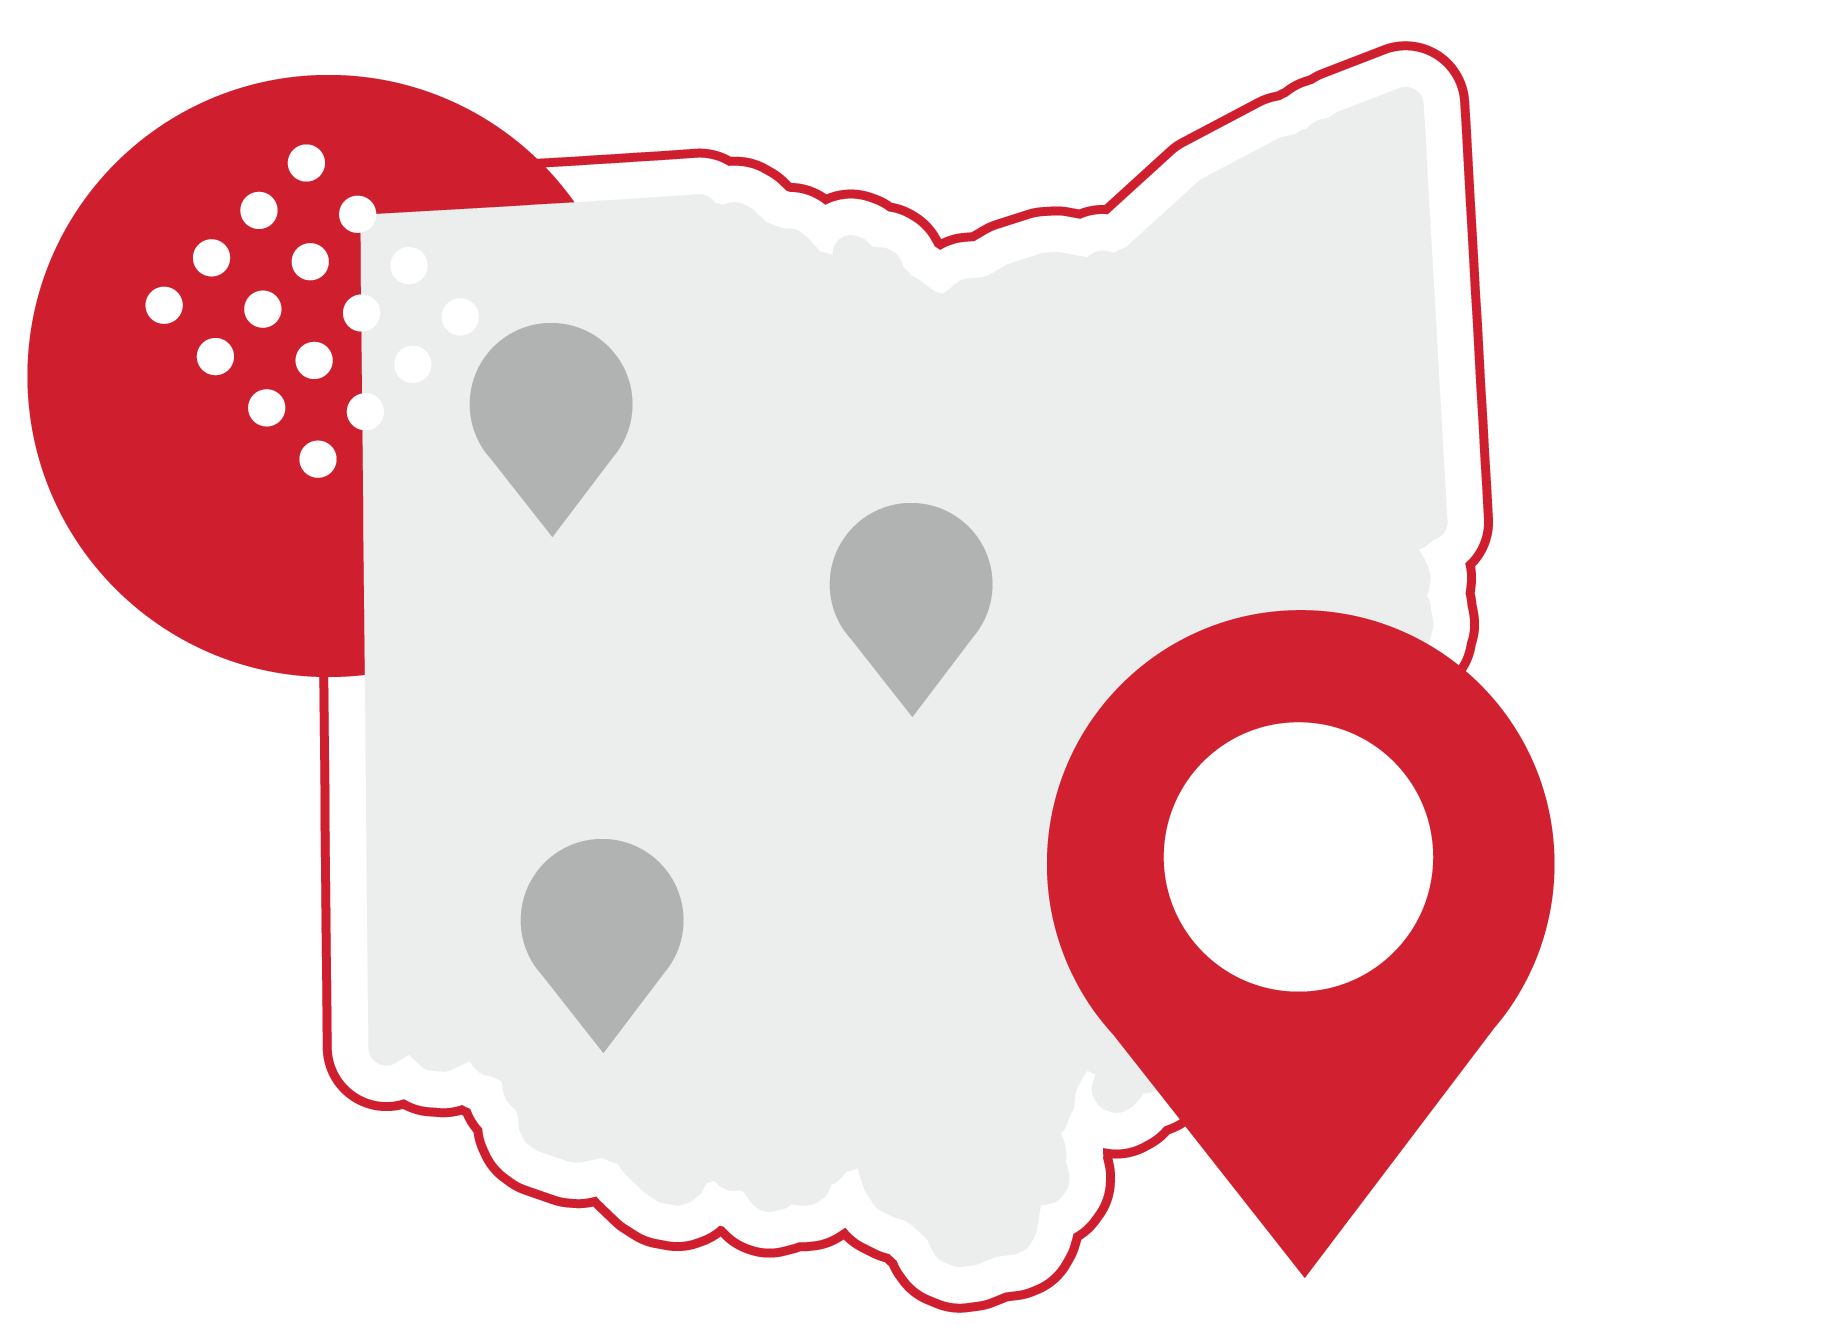 State of Ohio graphic with multiple locations marked